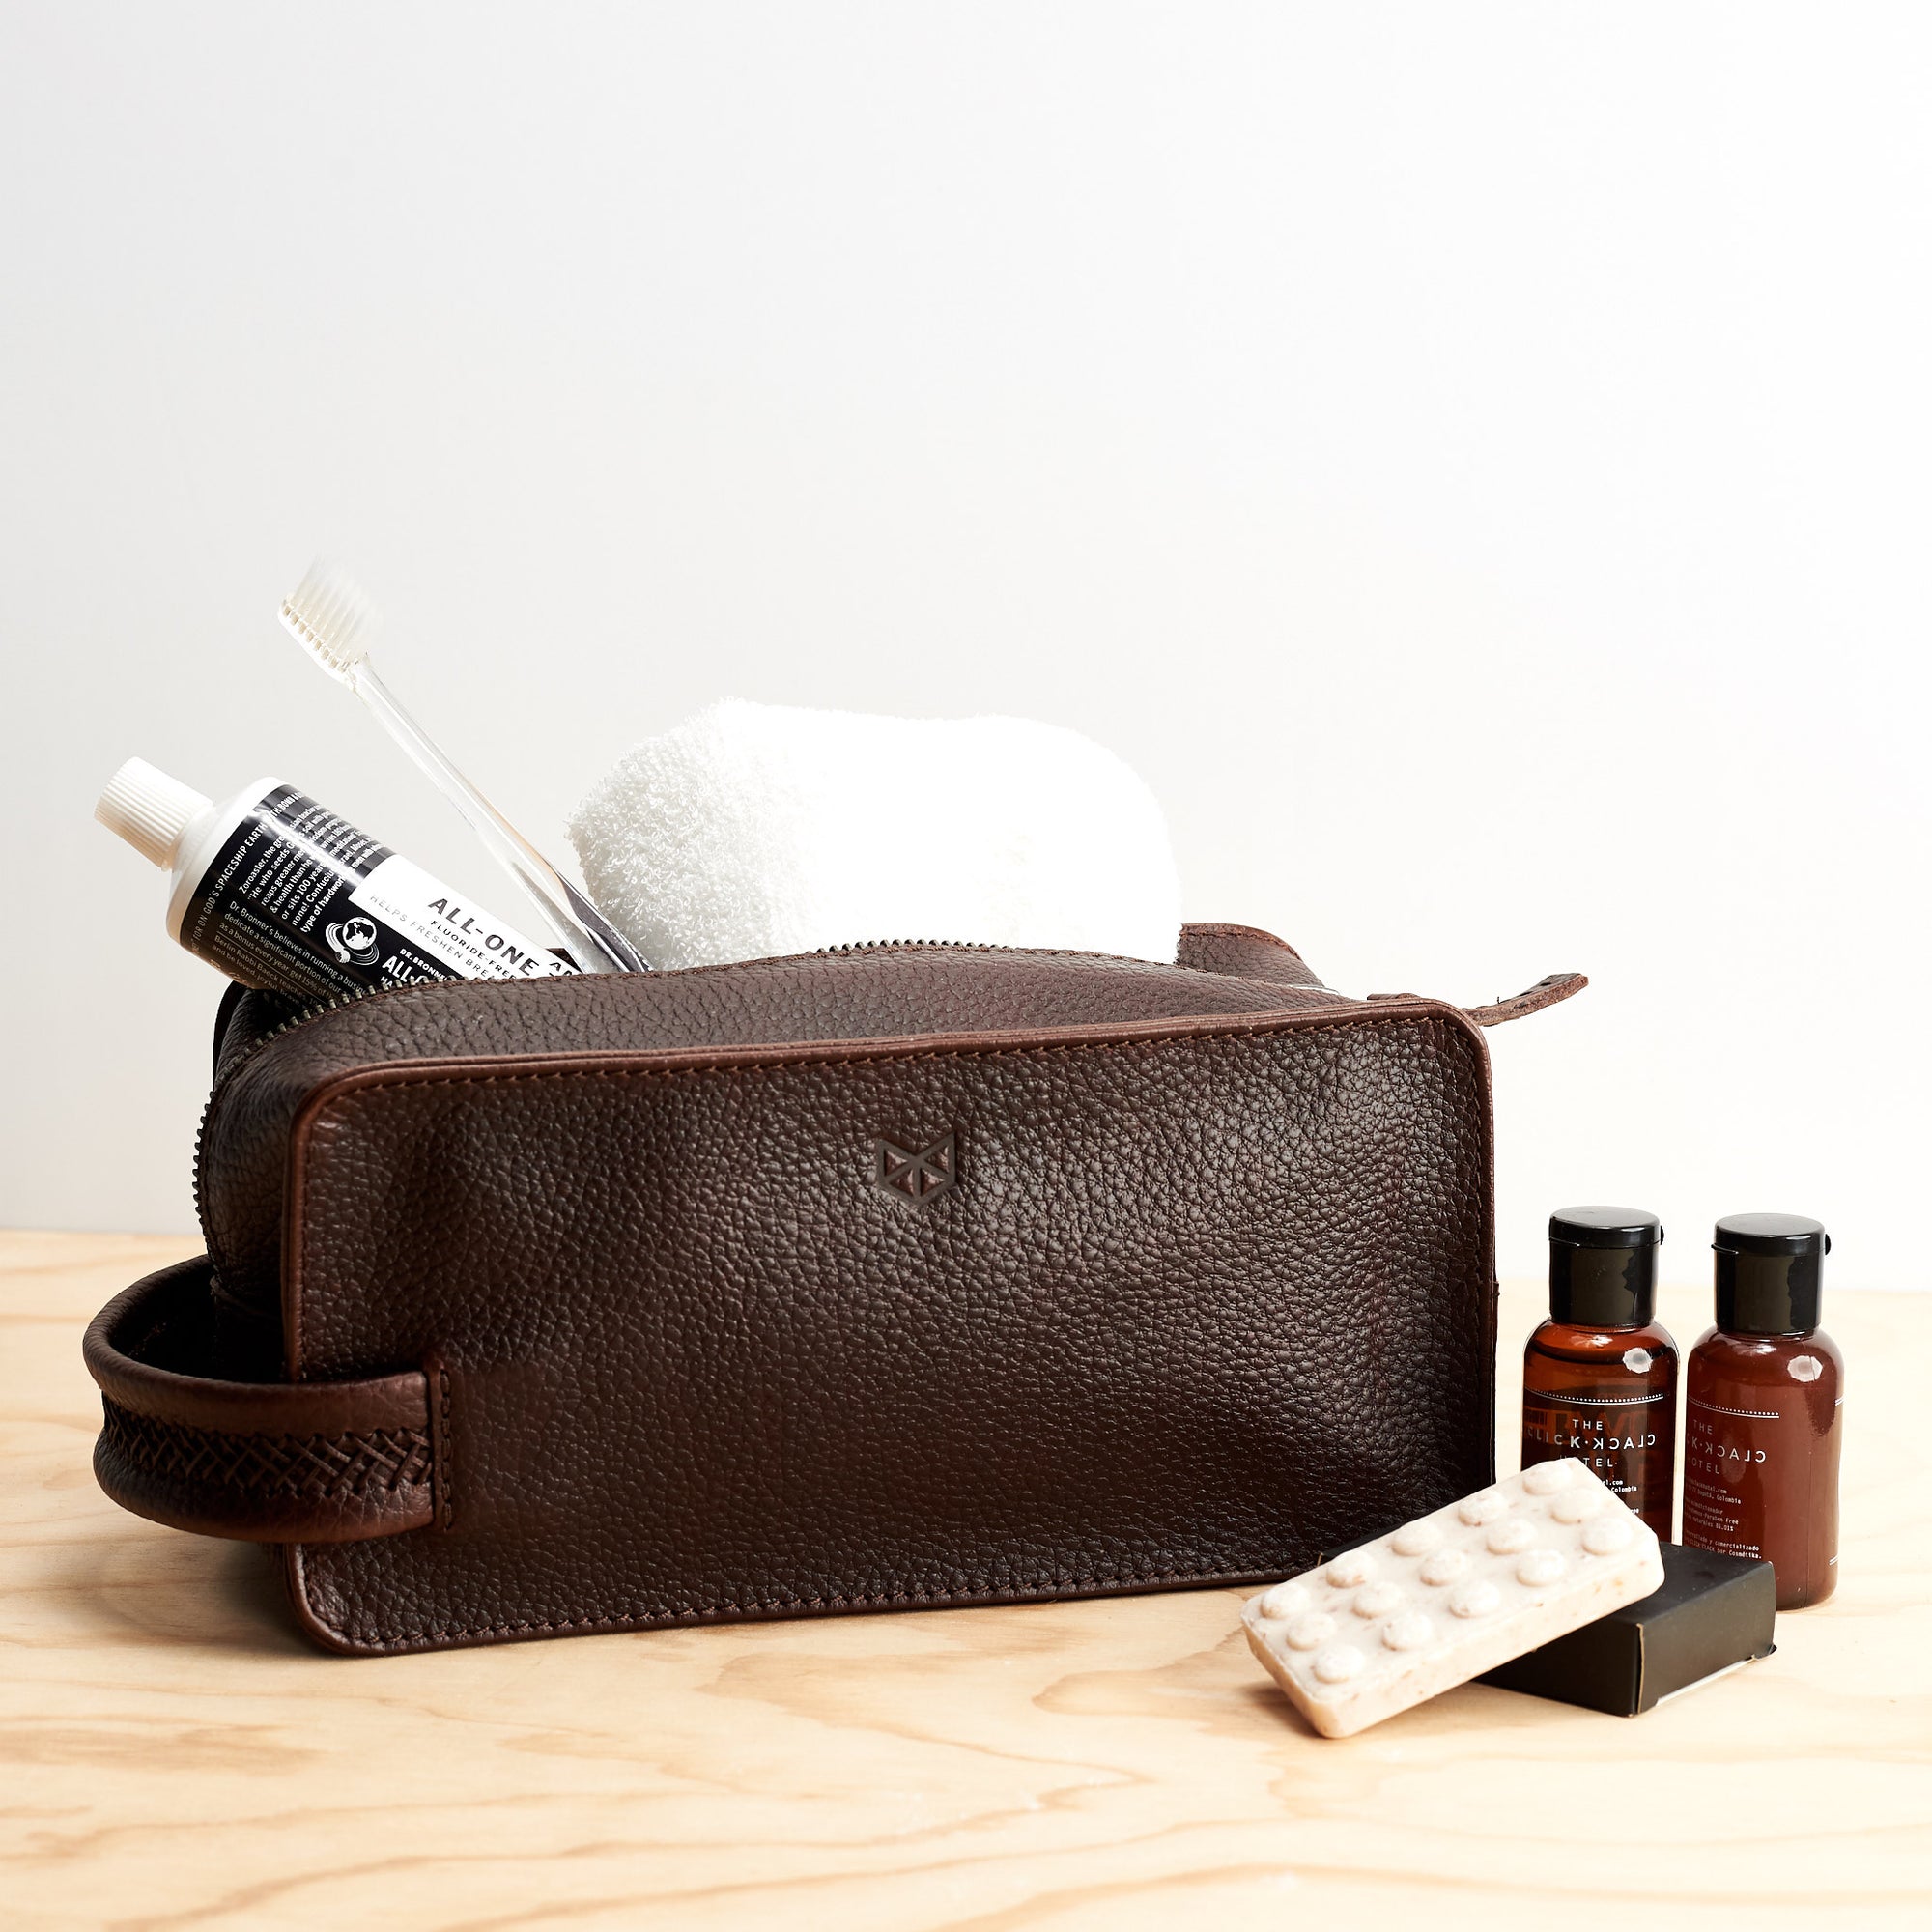 Toiletries. Dark Brown leather toiletry, shaving bag with hand stitched handle. Groomsmen gifts